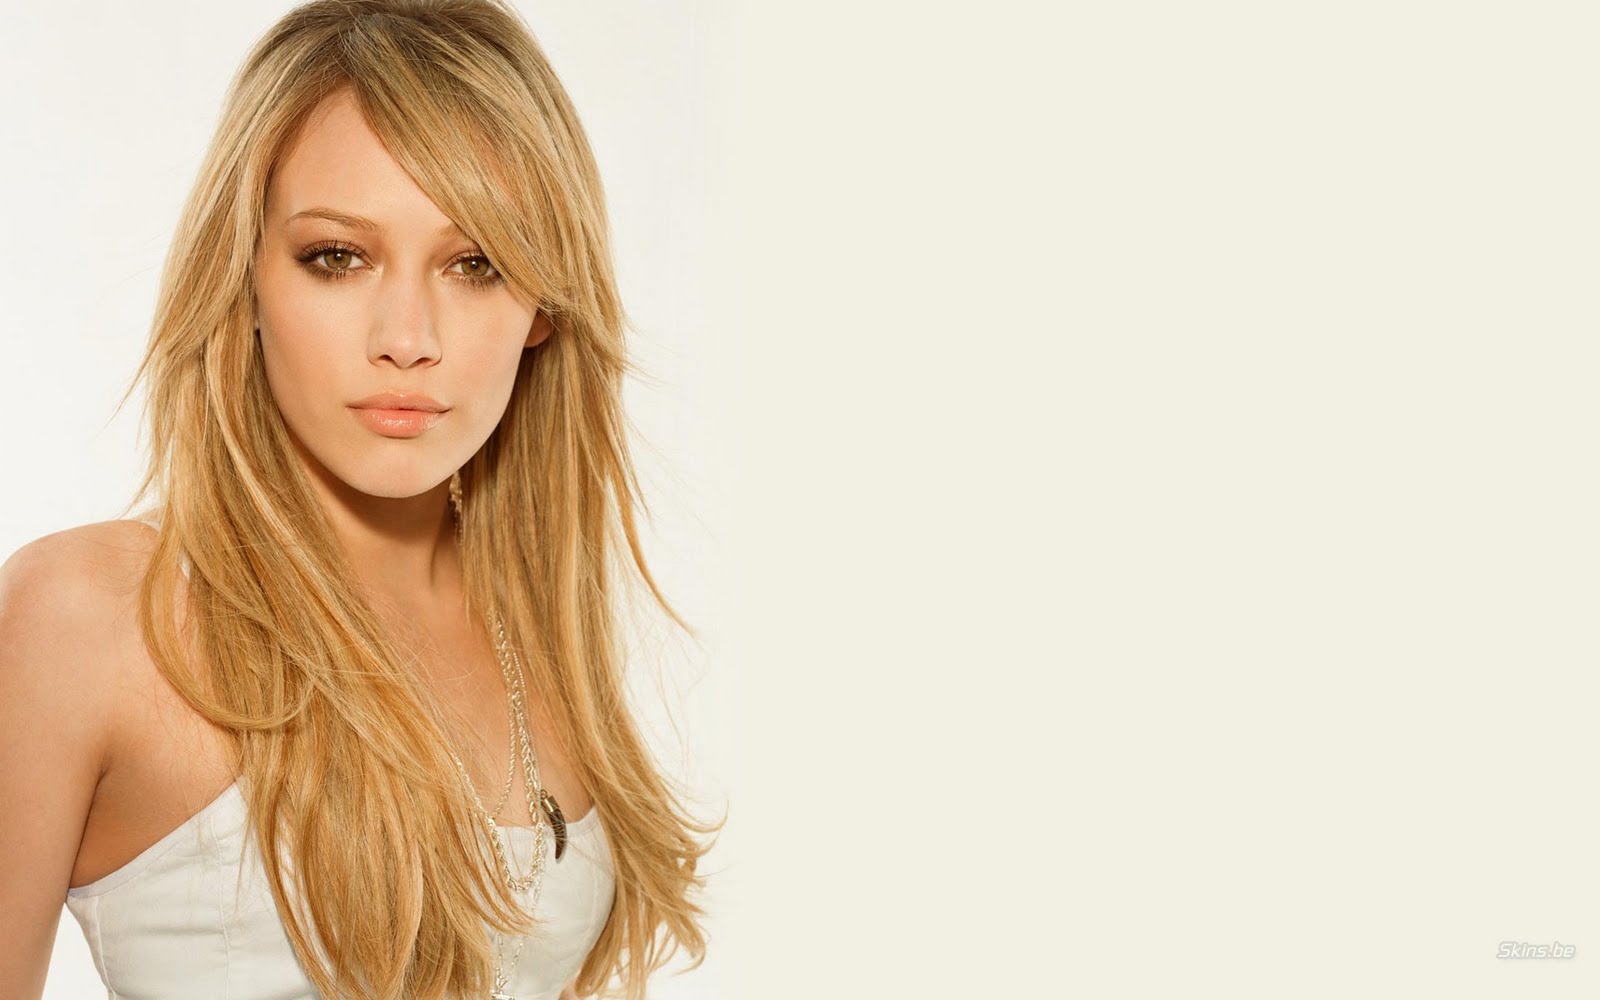 Mp3 Songs And Wallpaper Hilary Duff HD